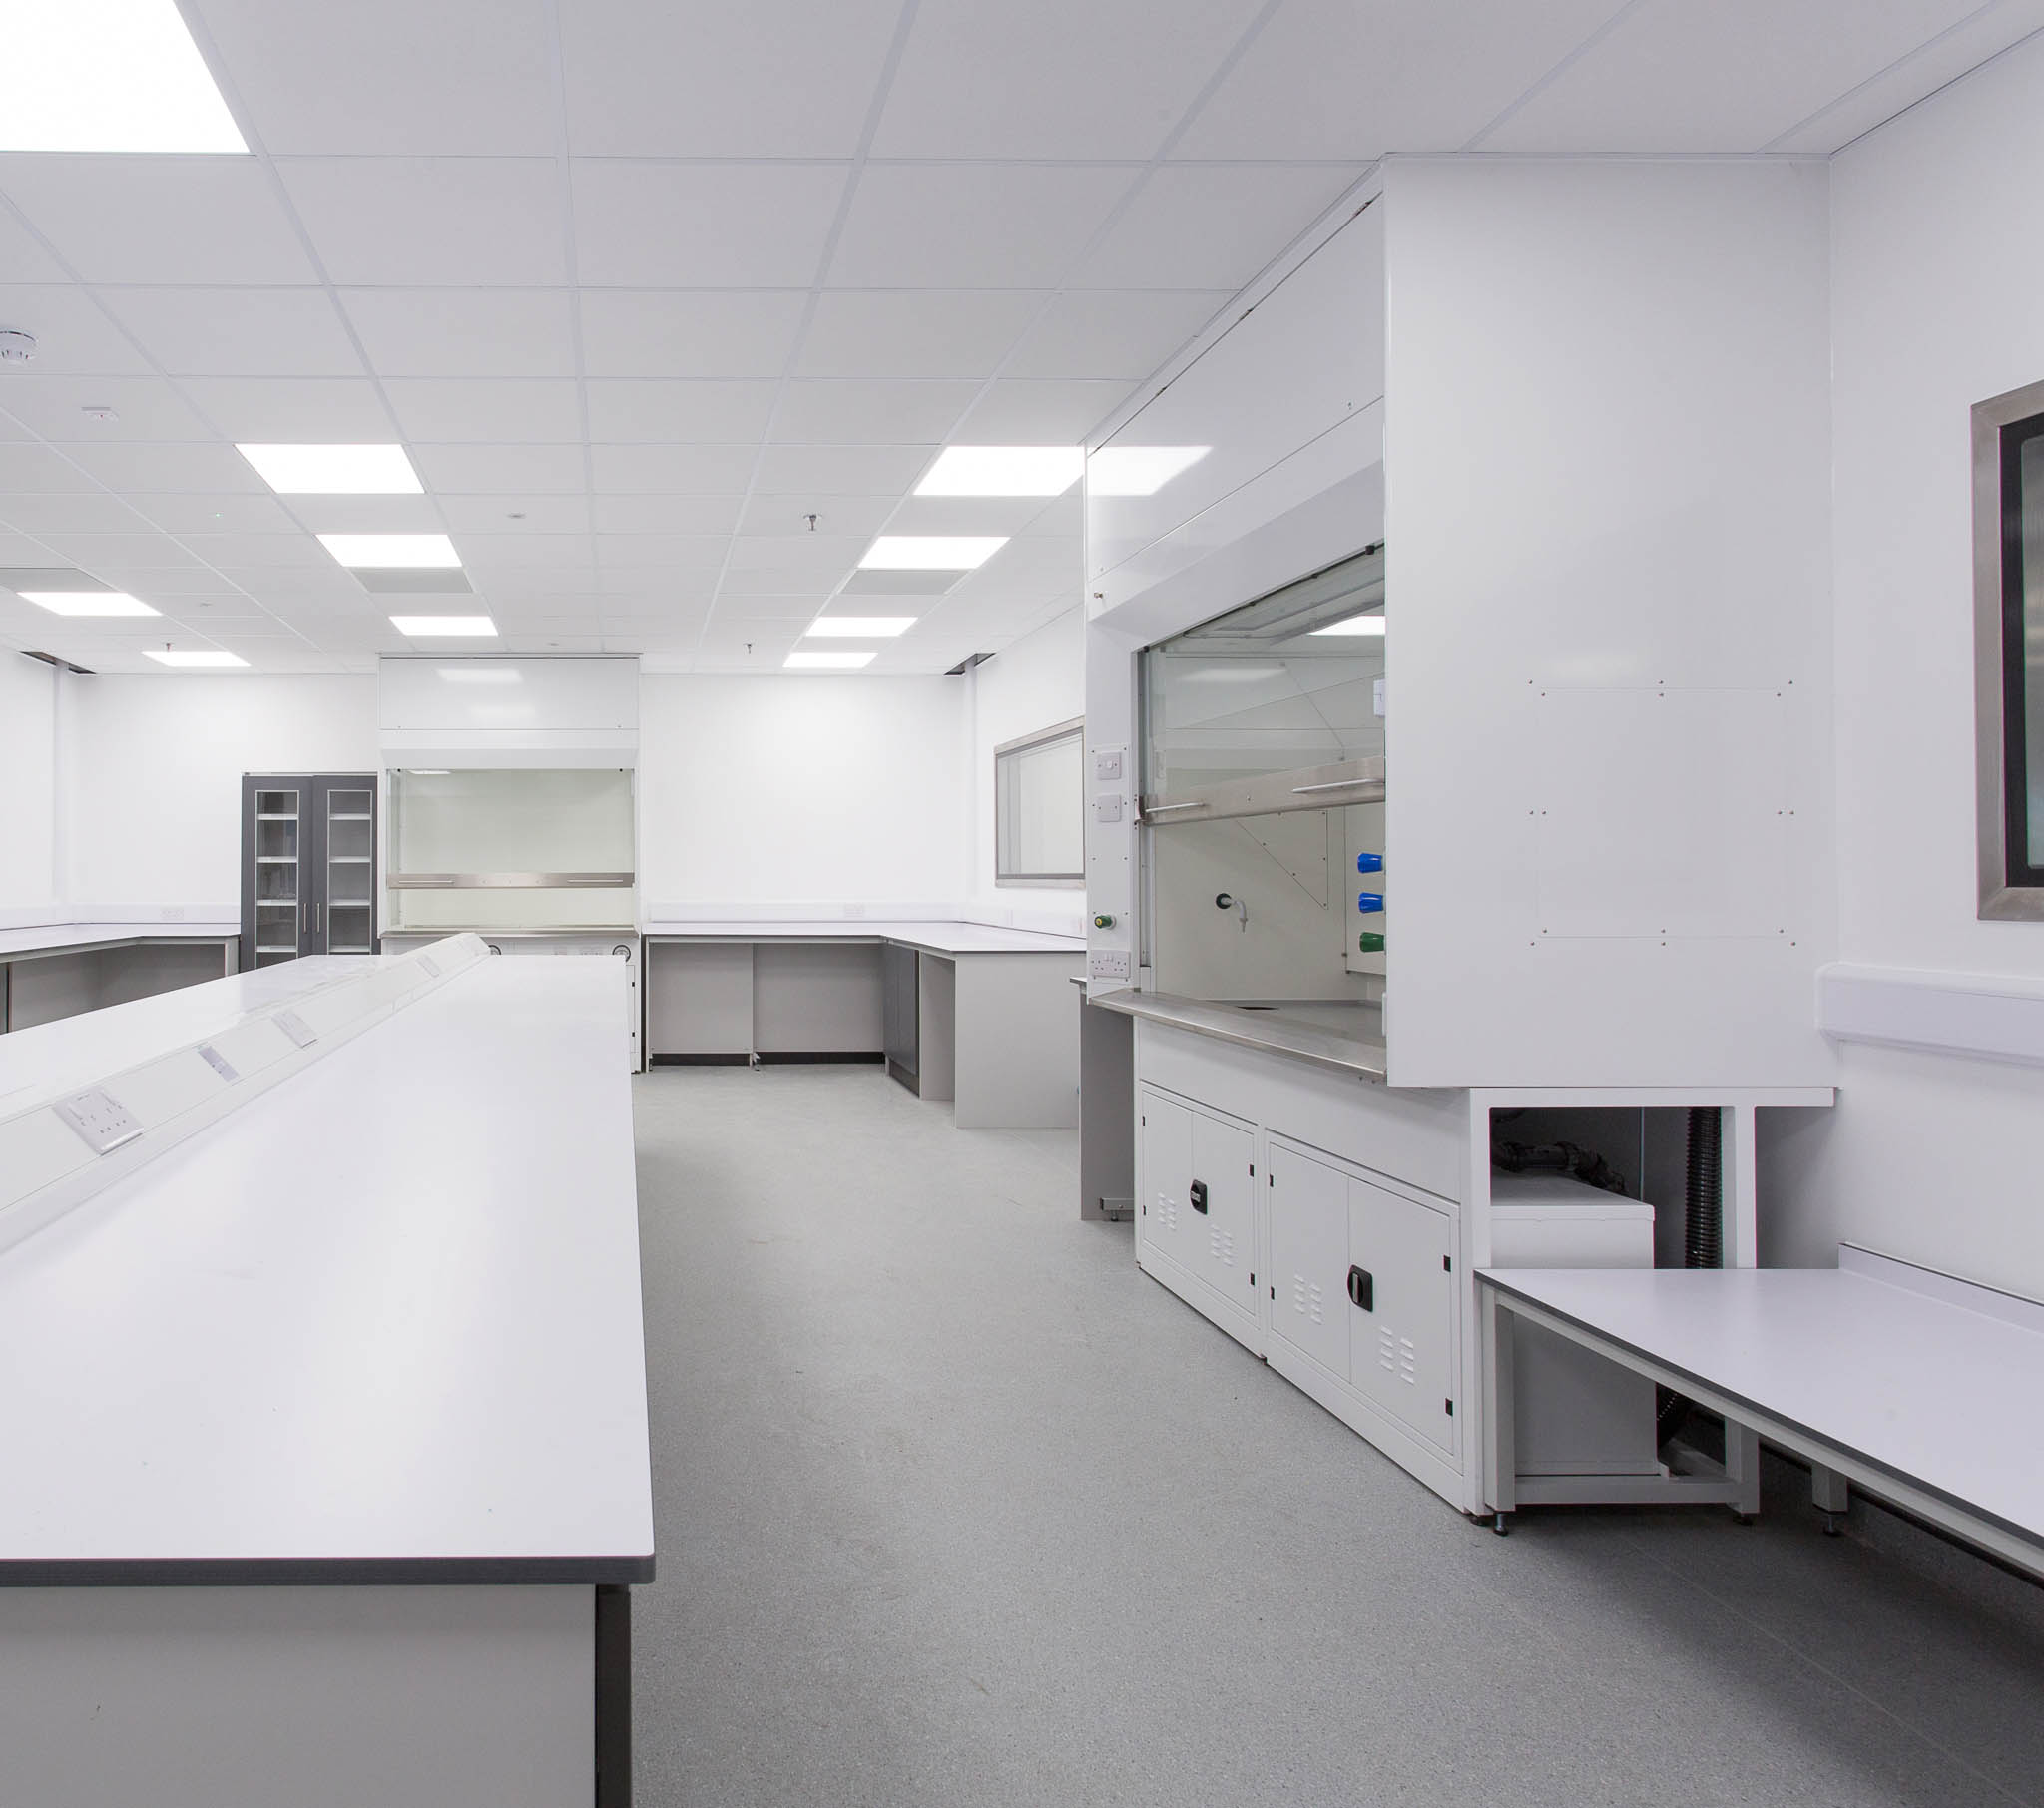 Our Projects - Boulting Environmental Services - Indivior